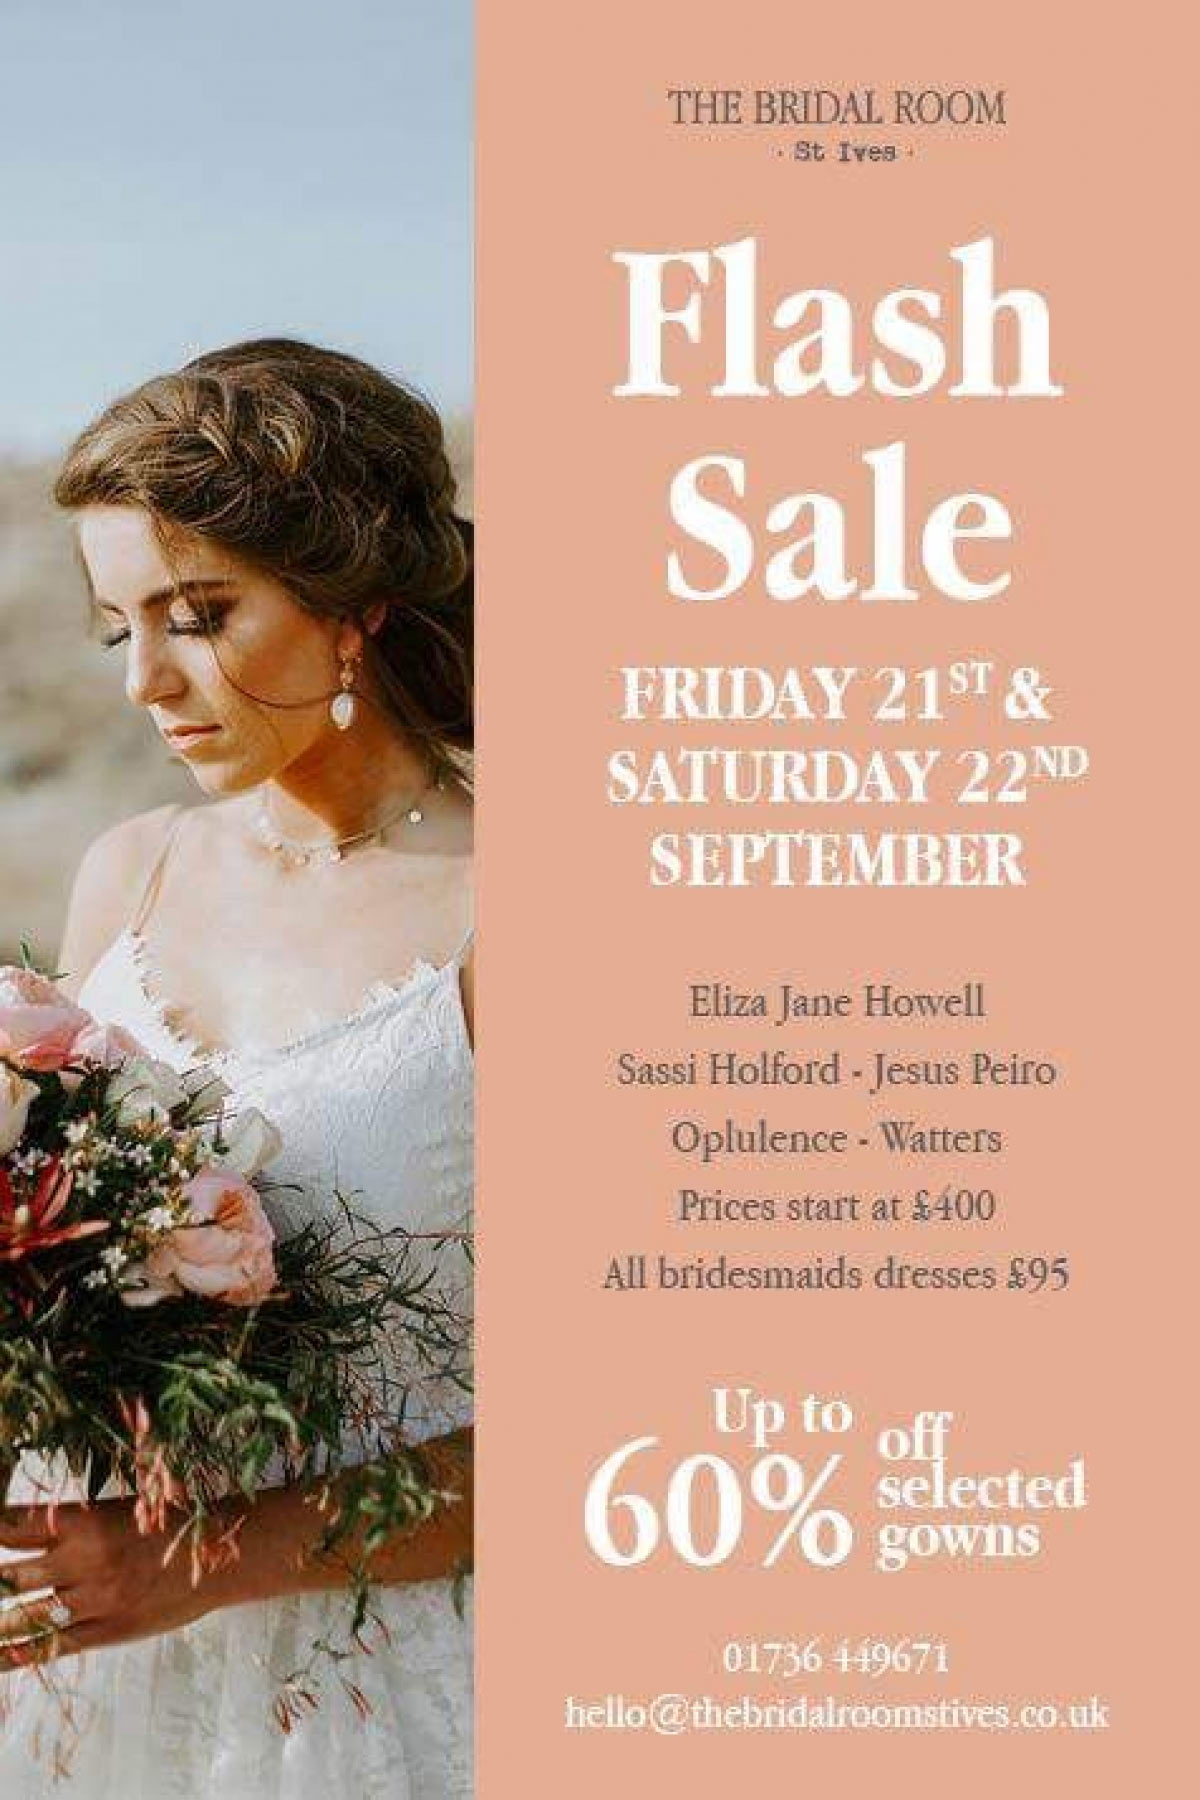 Flash sale at The Bridal Room St Ives!